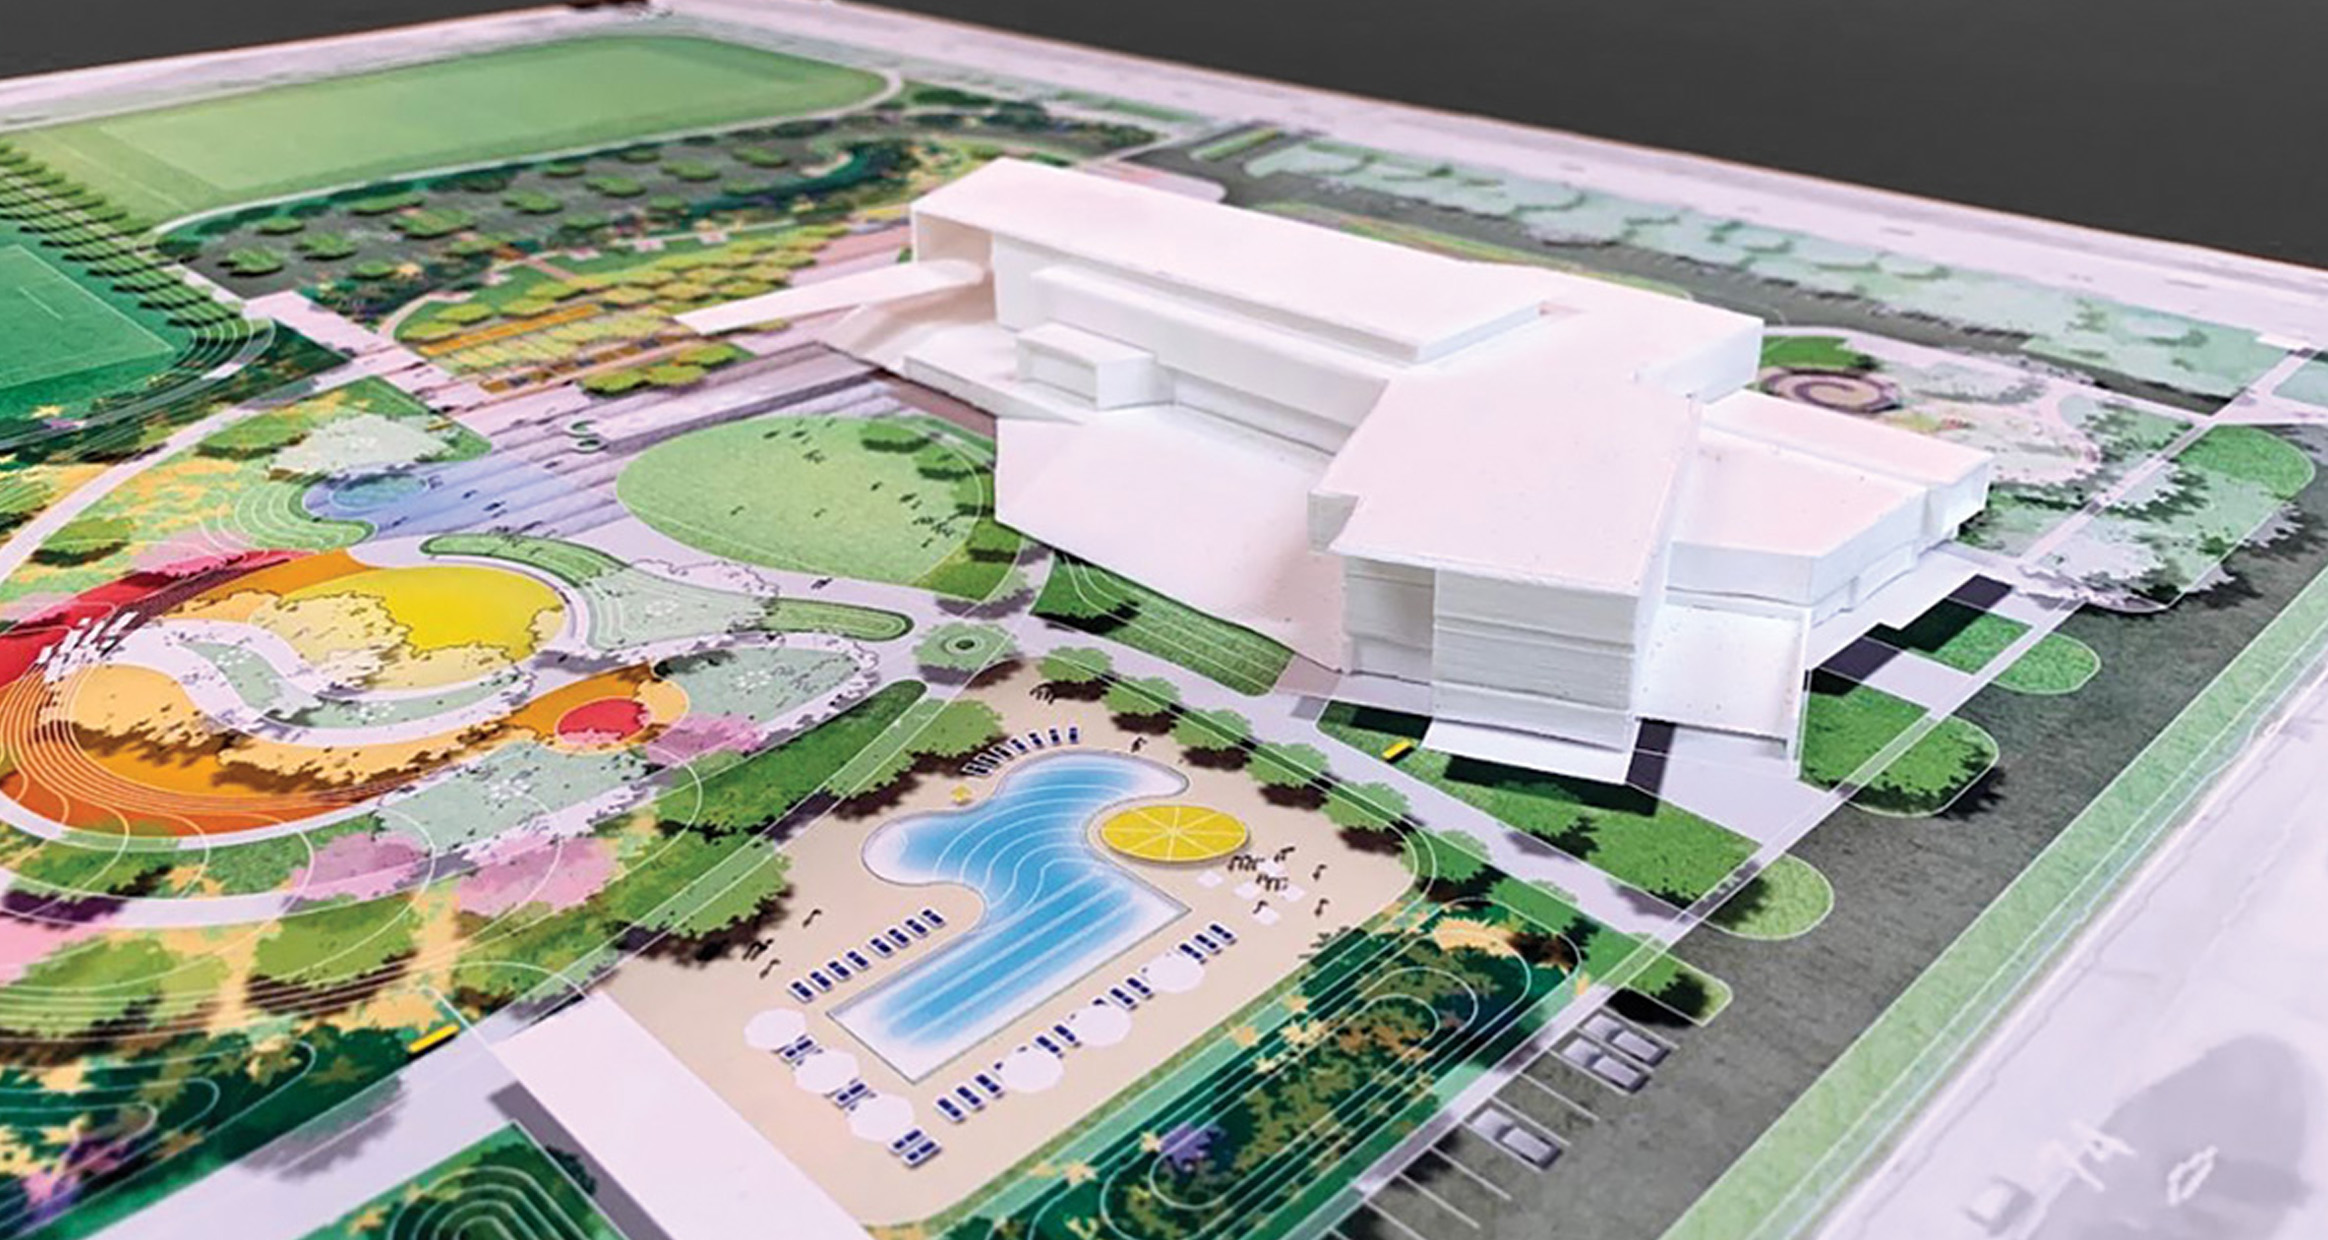 Building and campus model